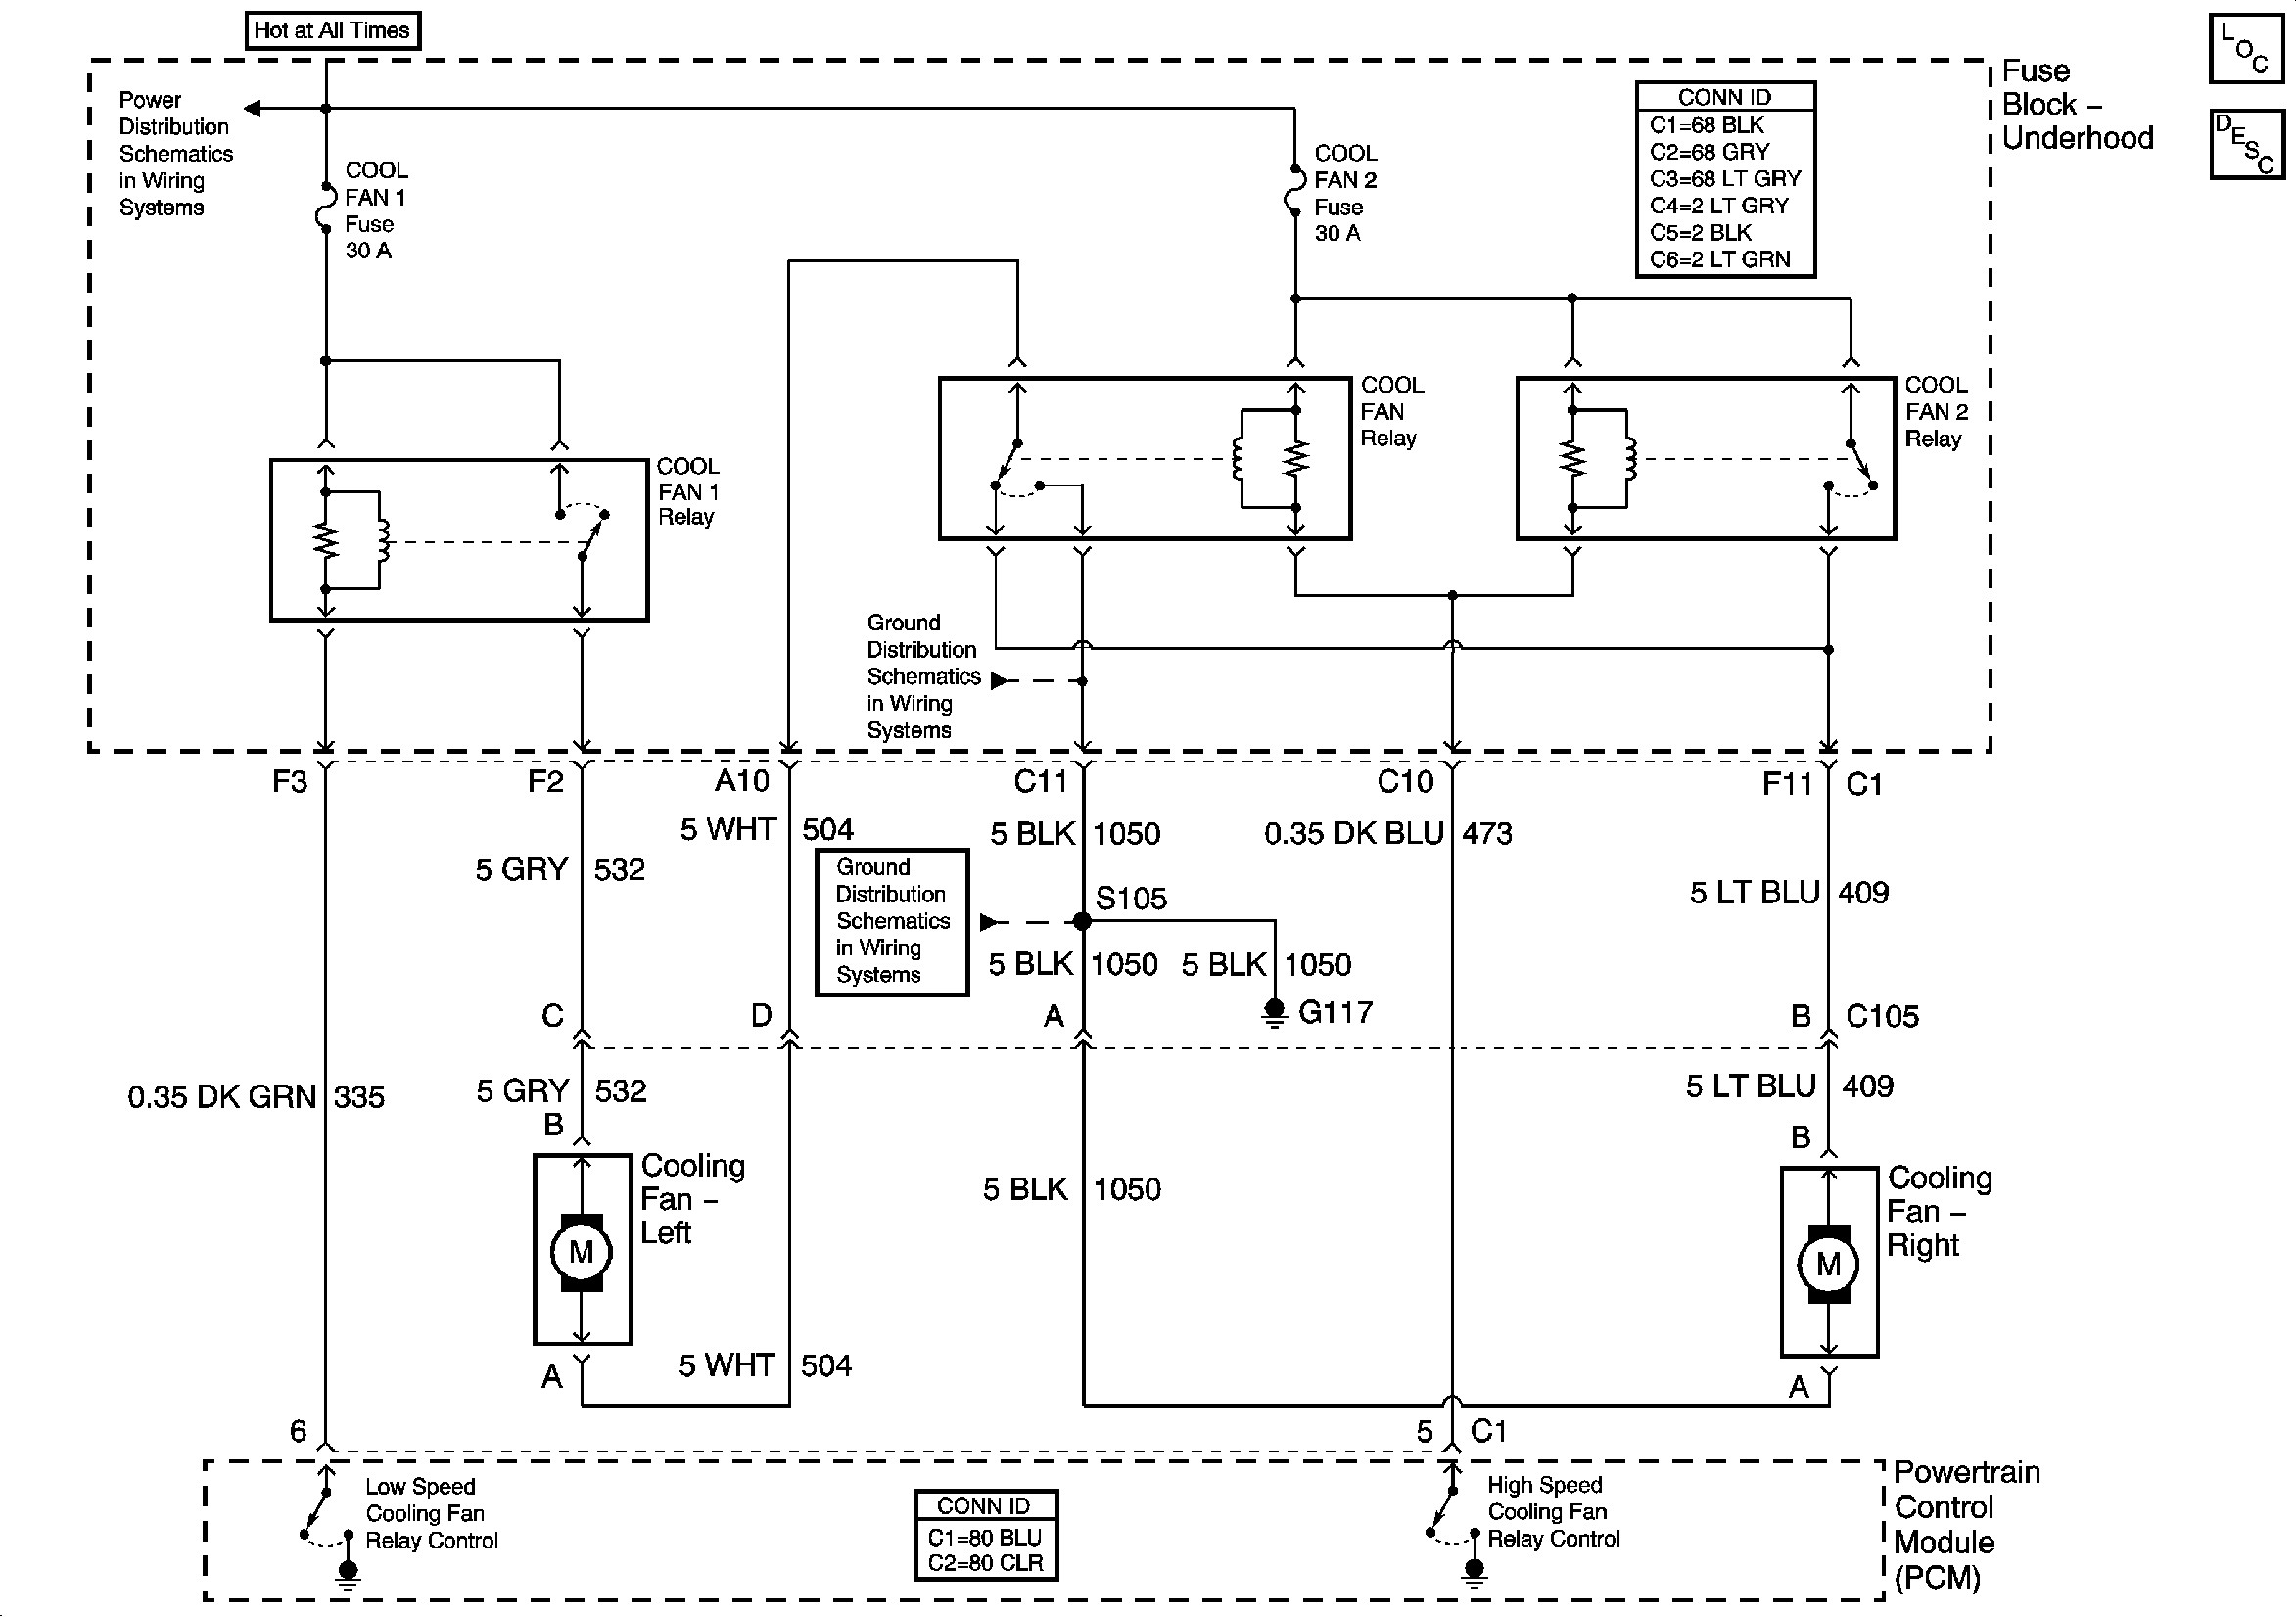 Diagram Of Radiator System Diagram Likewise Cooling Fan Relay Wiring Diagram to Her with 04 Of Diagram Of Radiator System